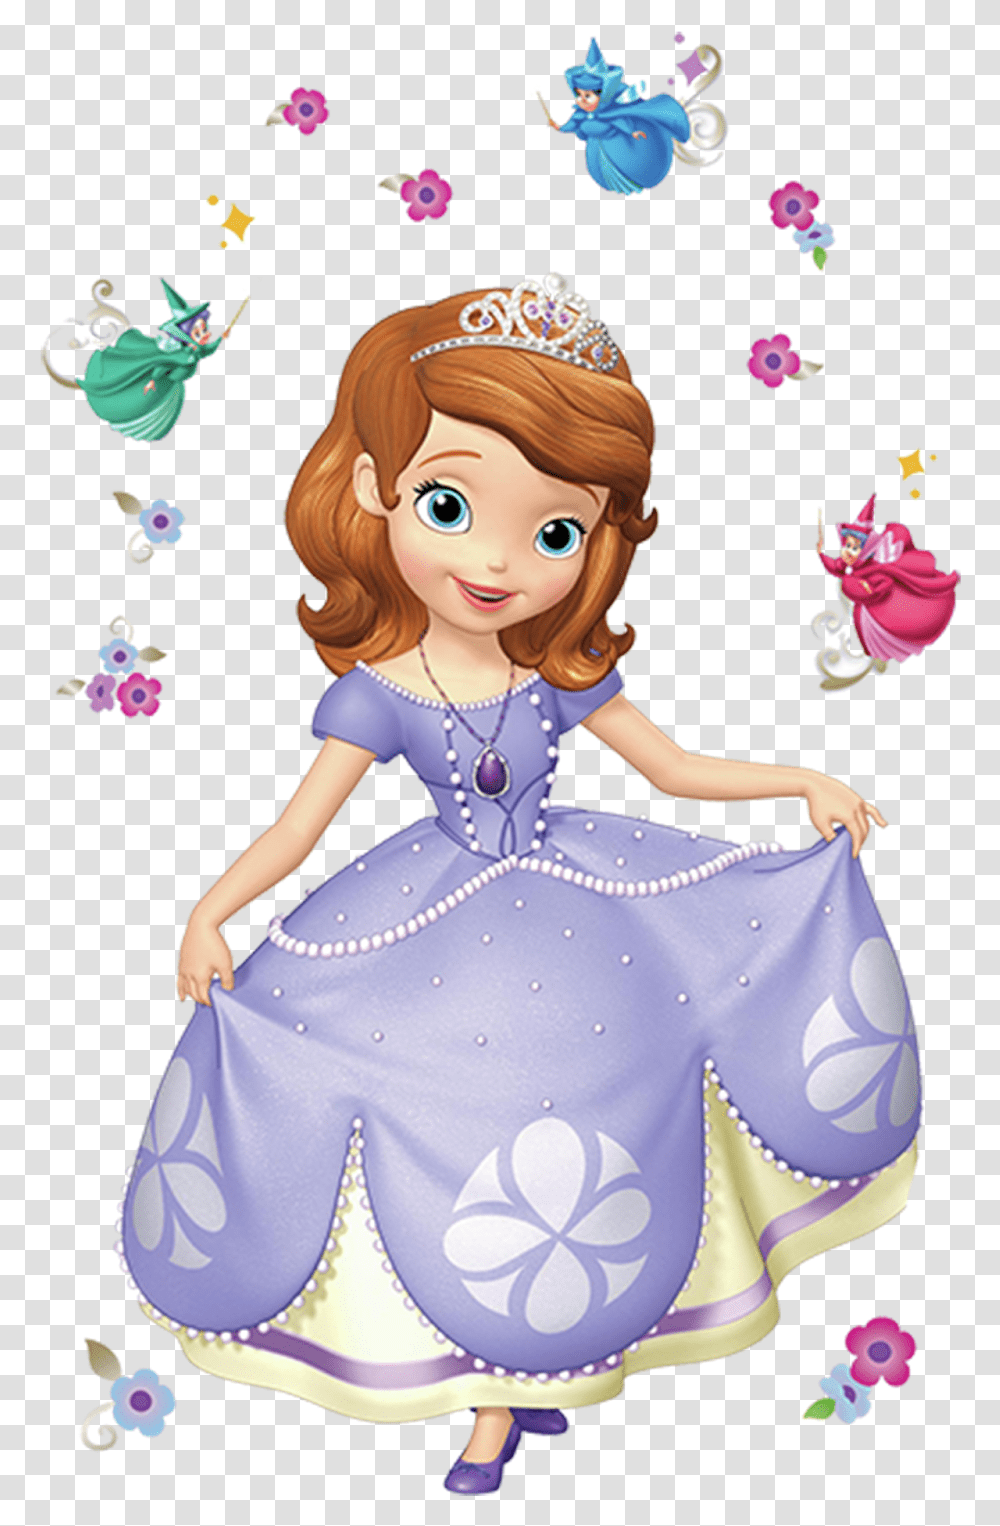 Cartoonclip Character Sofia The First, Doll, Toy, Barbie, Figurine Transparent Png